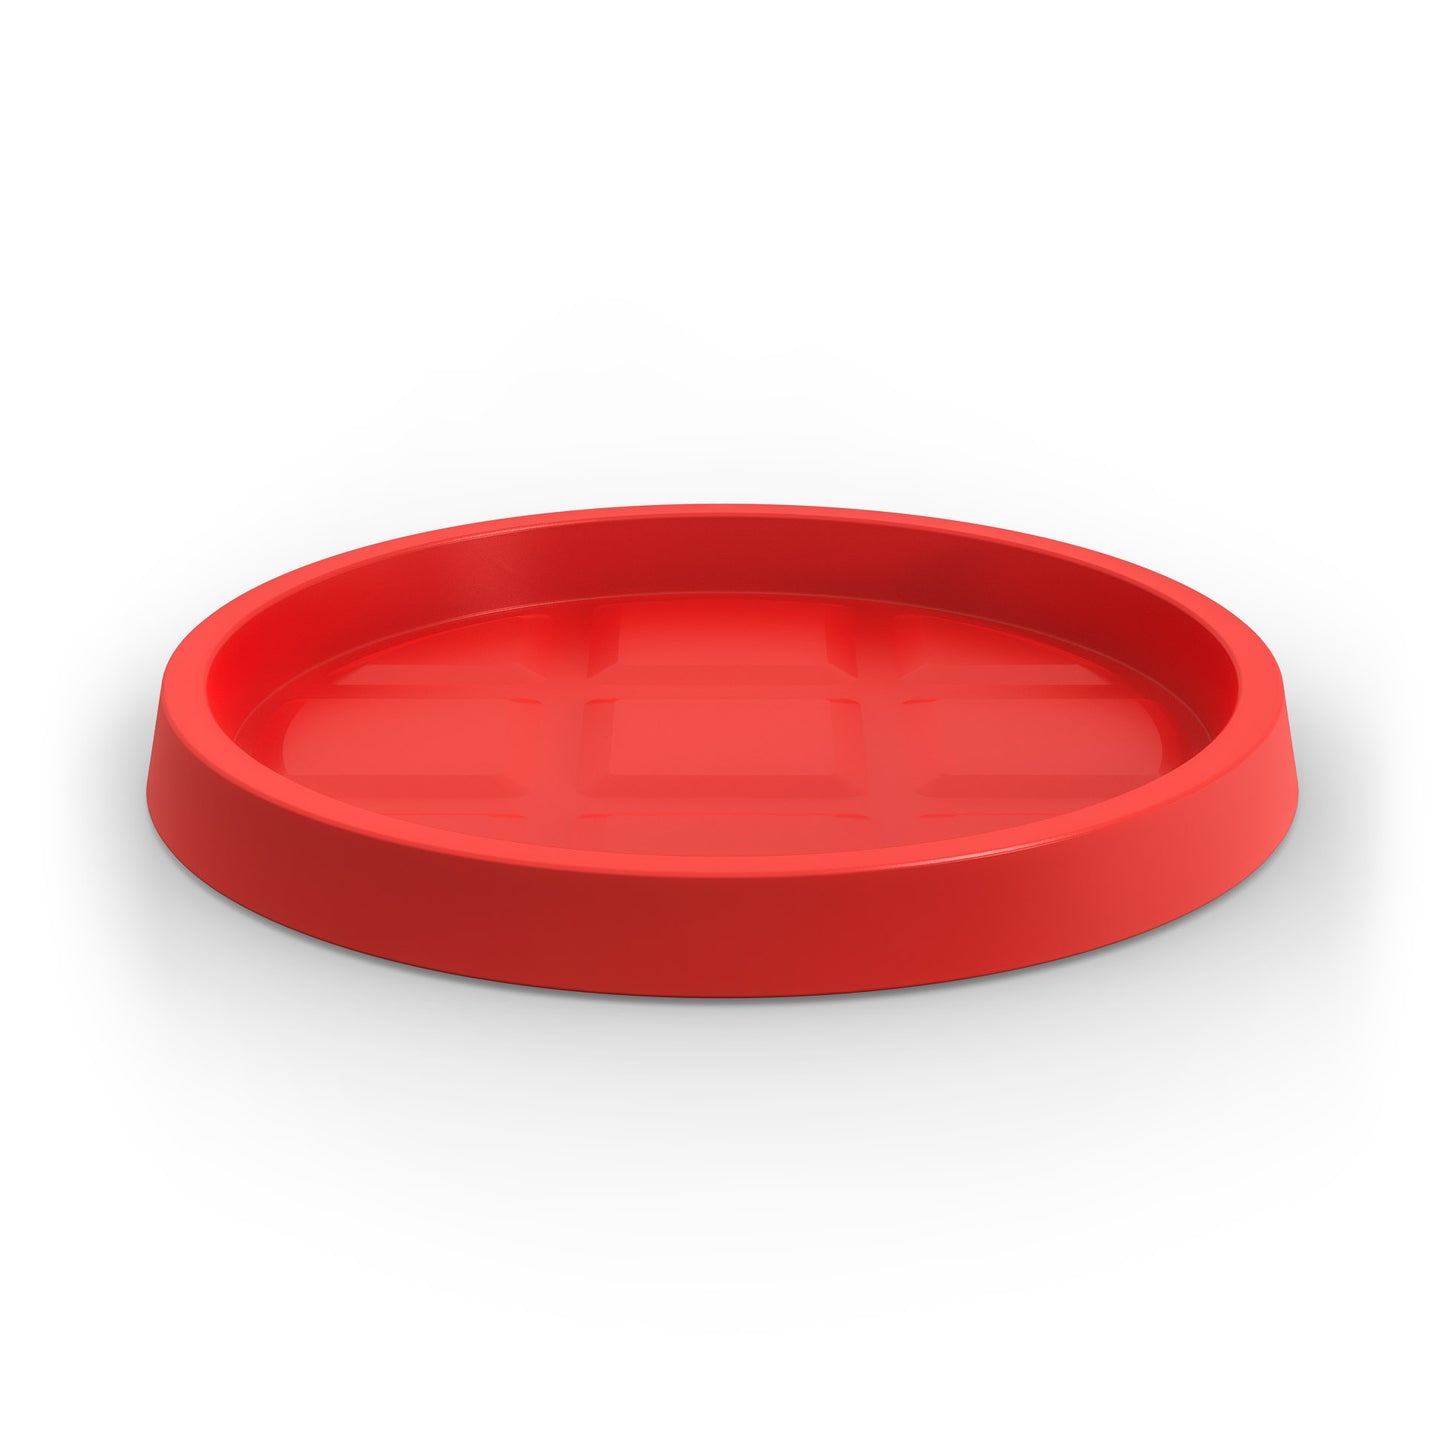 A large saucer for Modscene planters in red. NZ made.